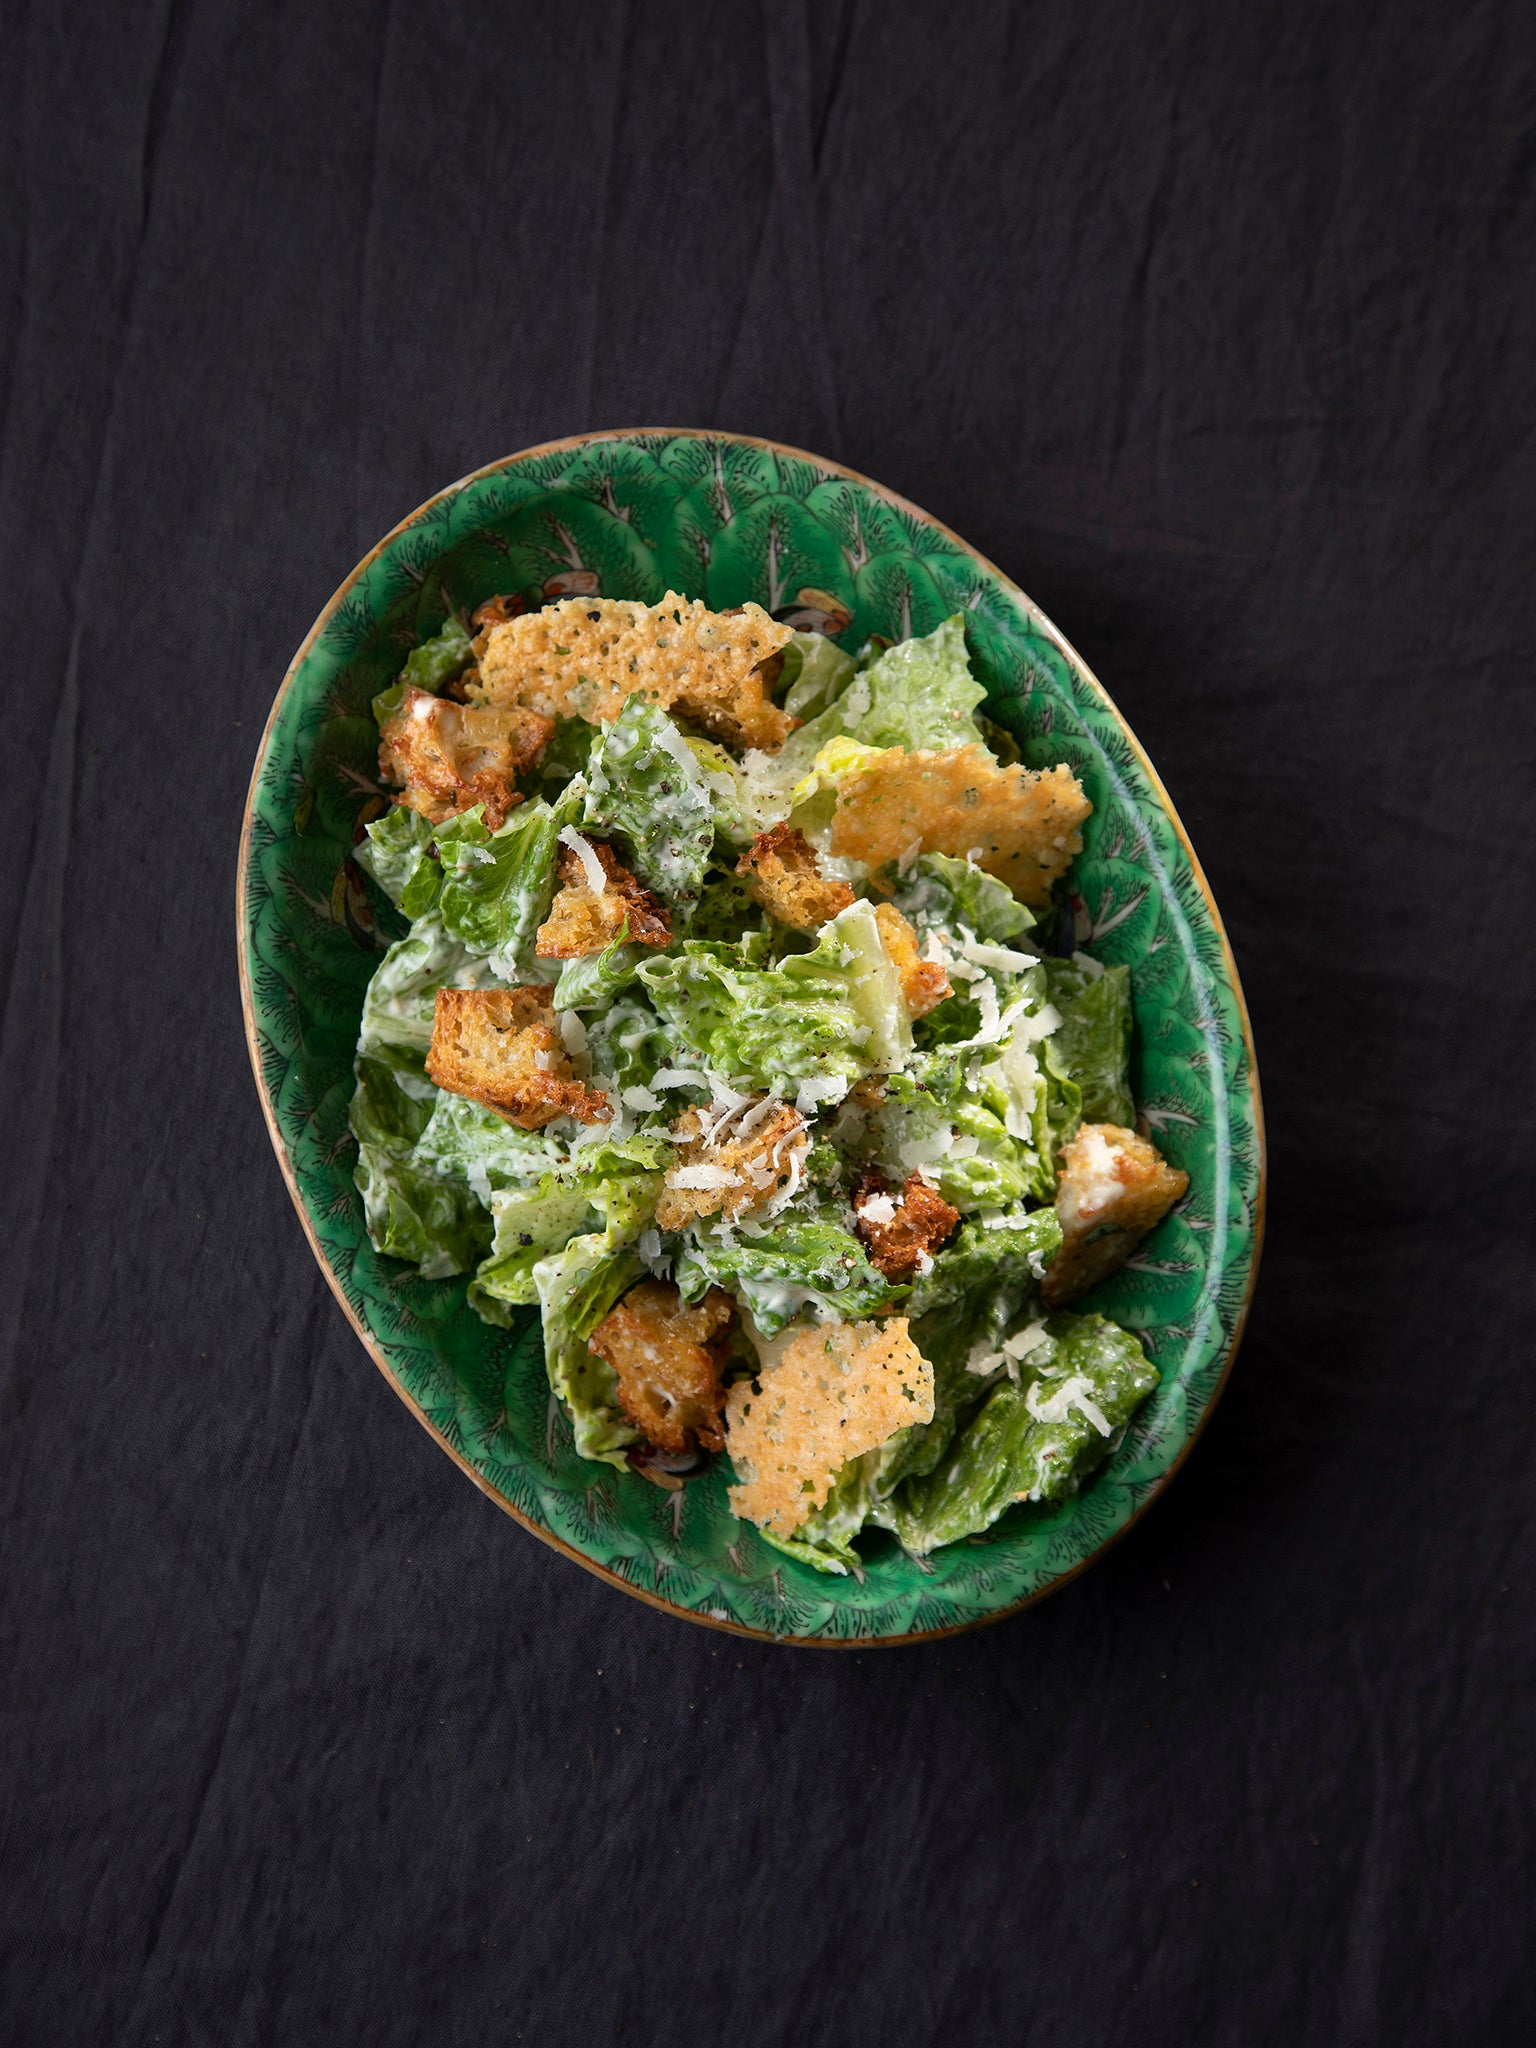 The parmesan shards make this salad dinner party worthy